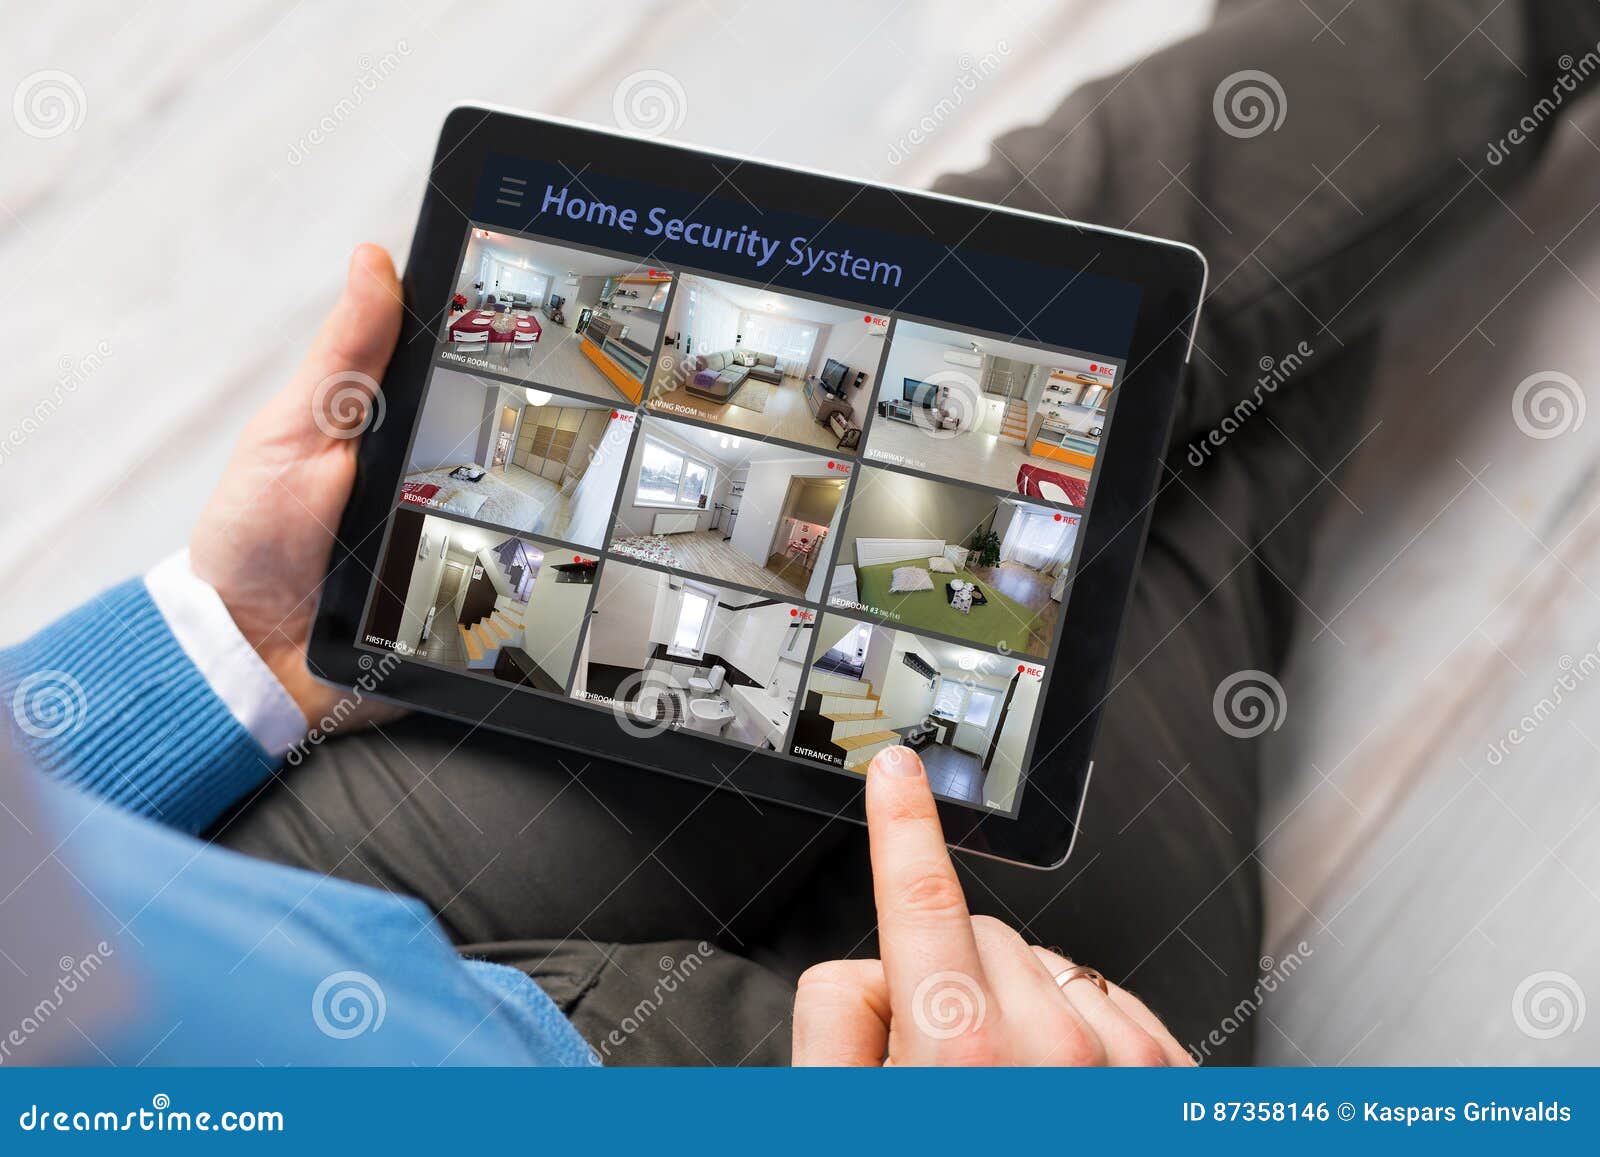 man looking at home security cameras on tablet computer